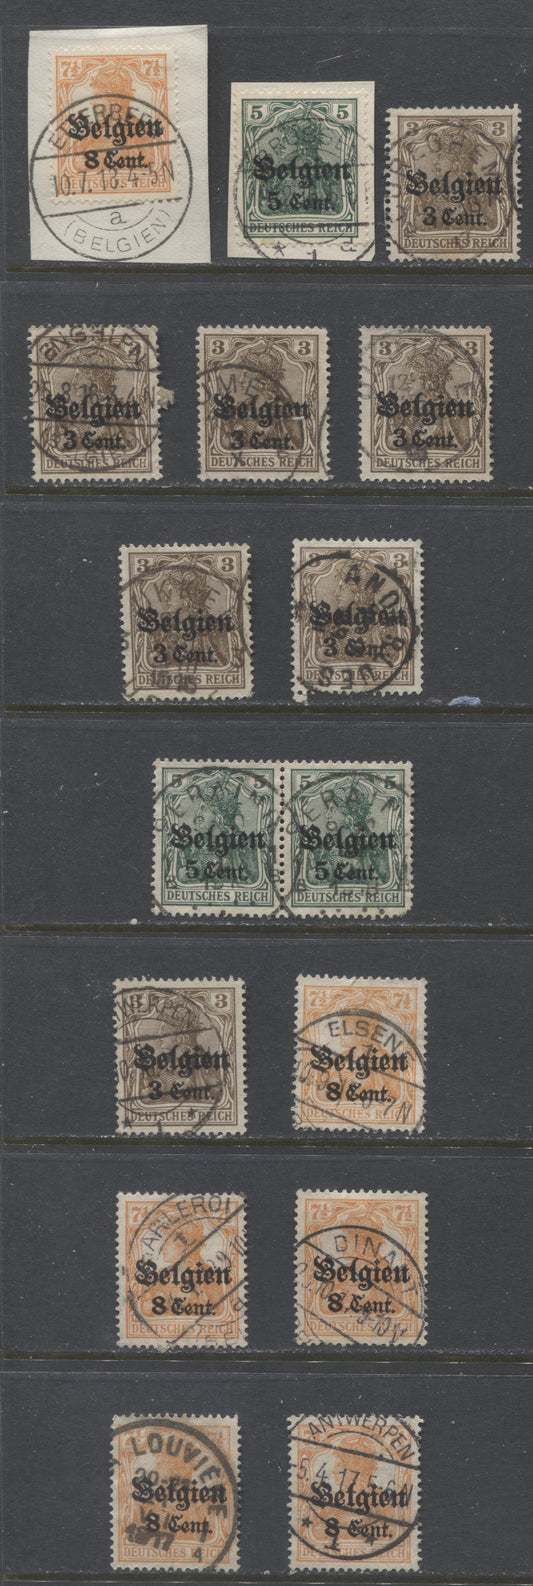 Lot 467 German Occupation of Belgium SC#N11  1916-1918 Surcharged Germania Issue, All With SON Town Cancels, 2 On Piece. Various Spacings Betweeen Numerals & "Cent" , 14 VF Used Singles & Pair,  Estimated Value $85